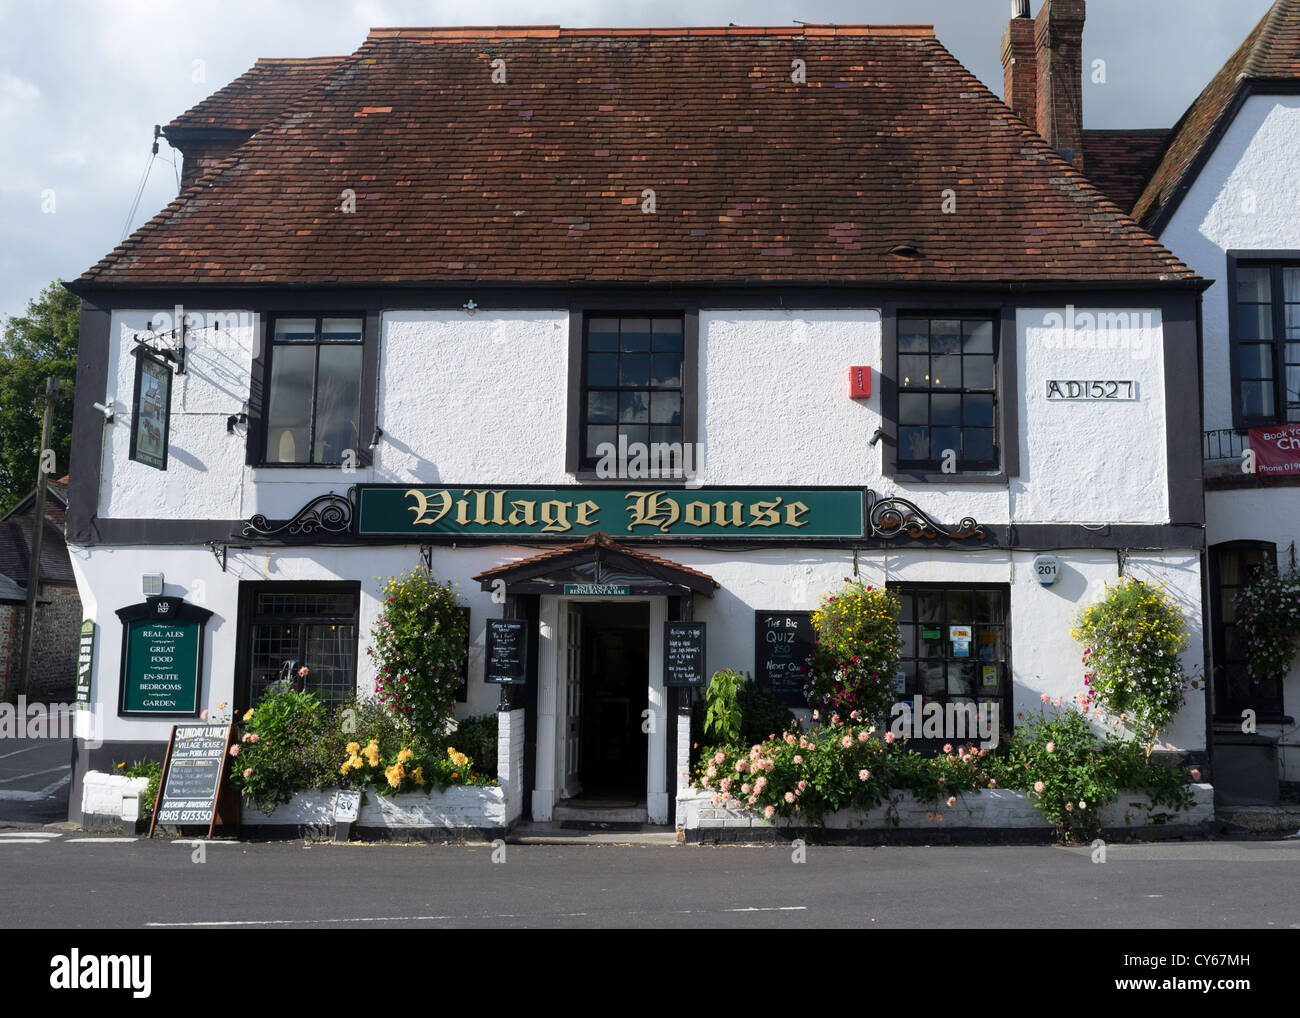 'Village House' a local village public house in Findon, West Sussex Stock Photo